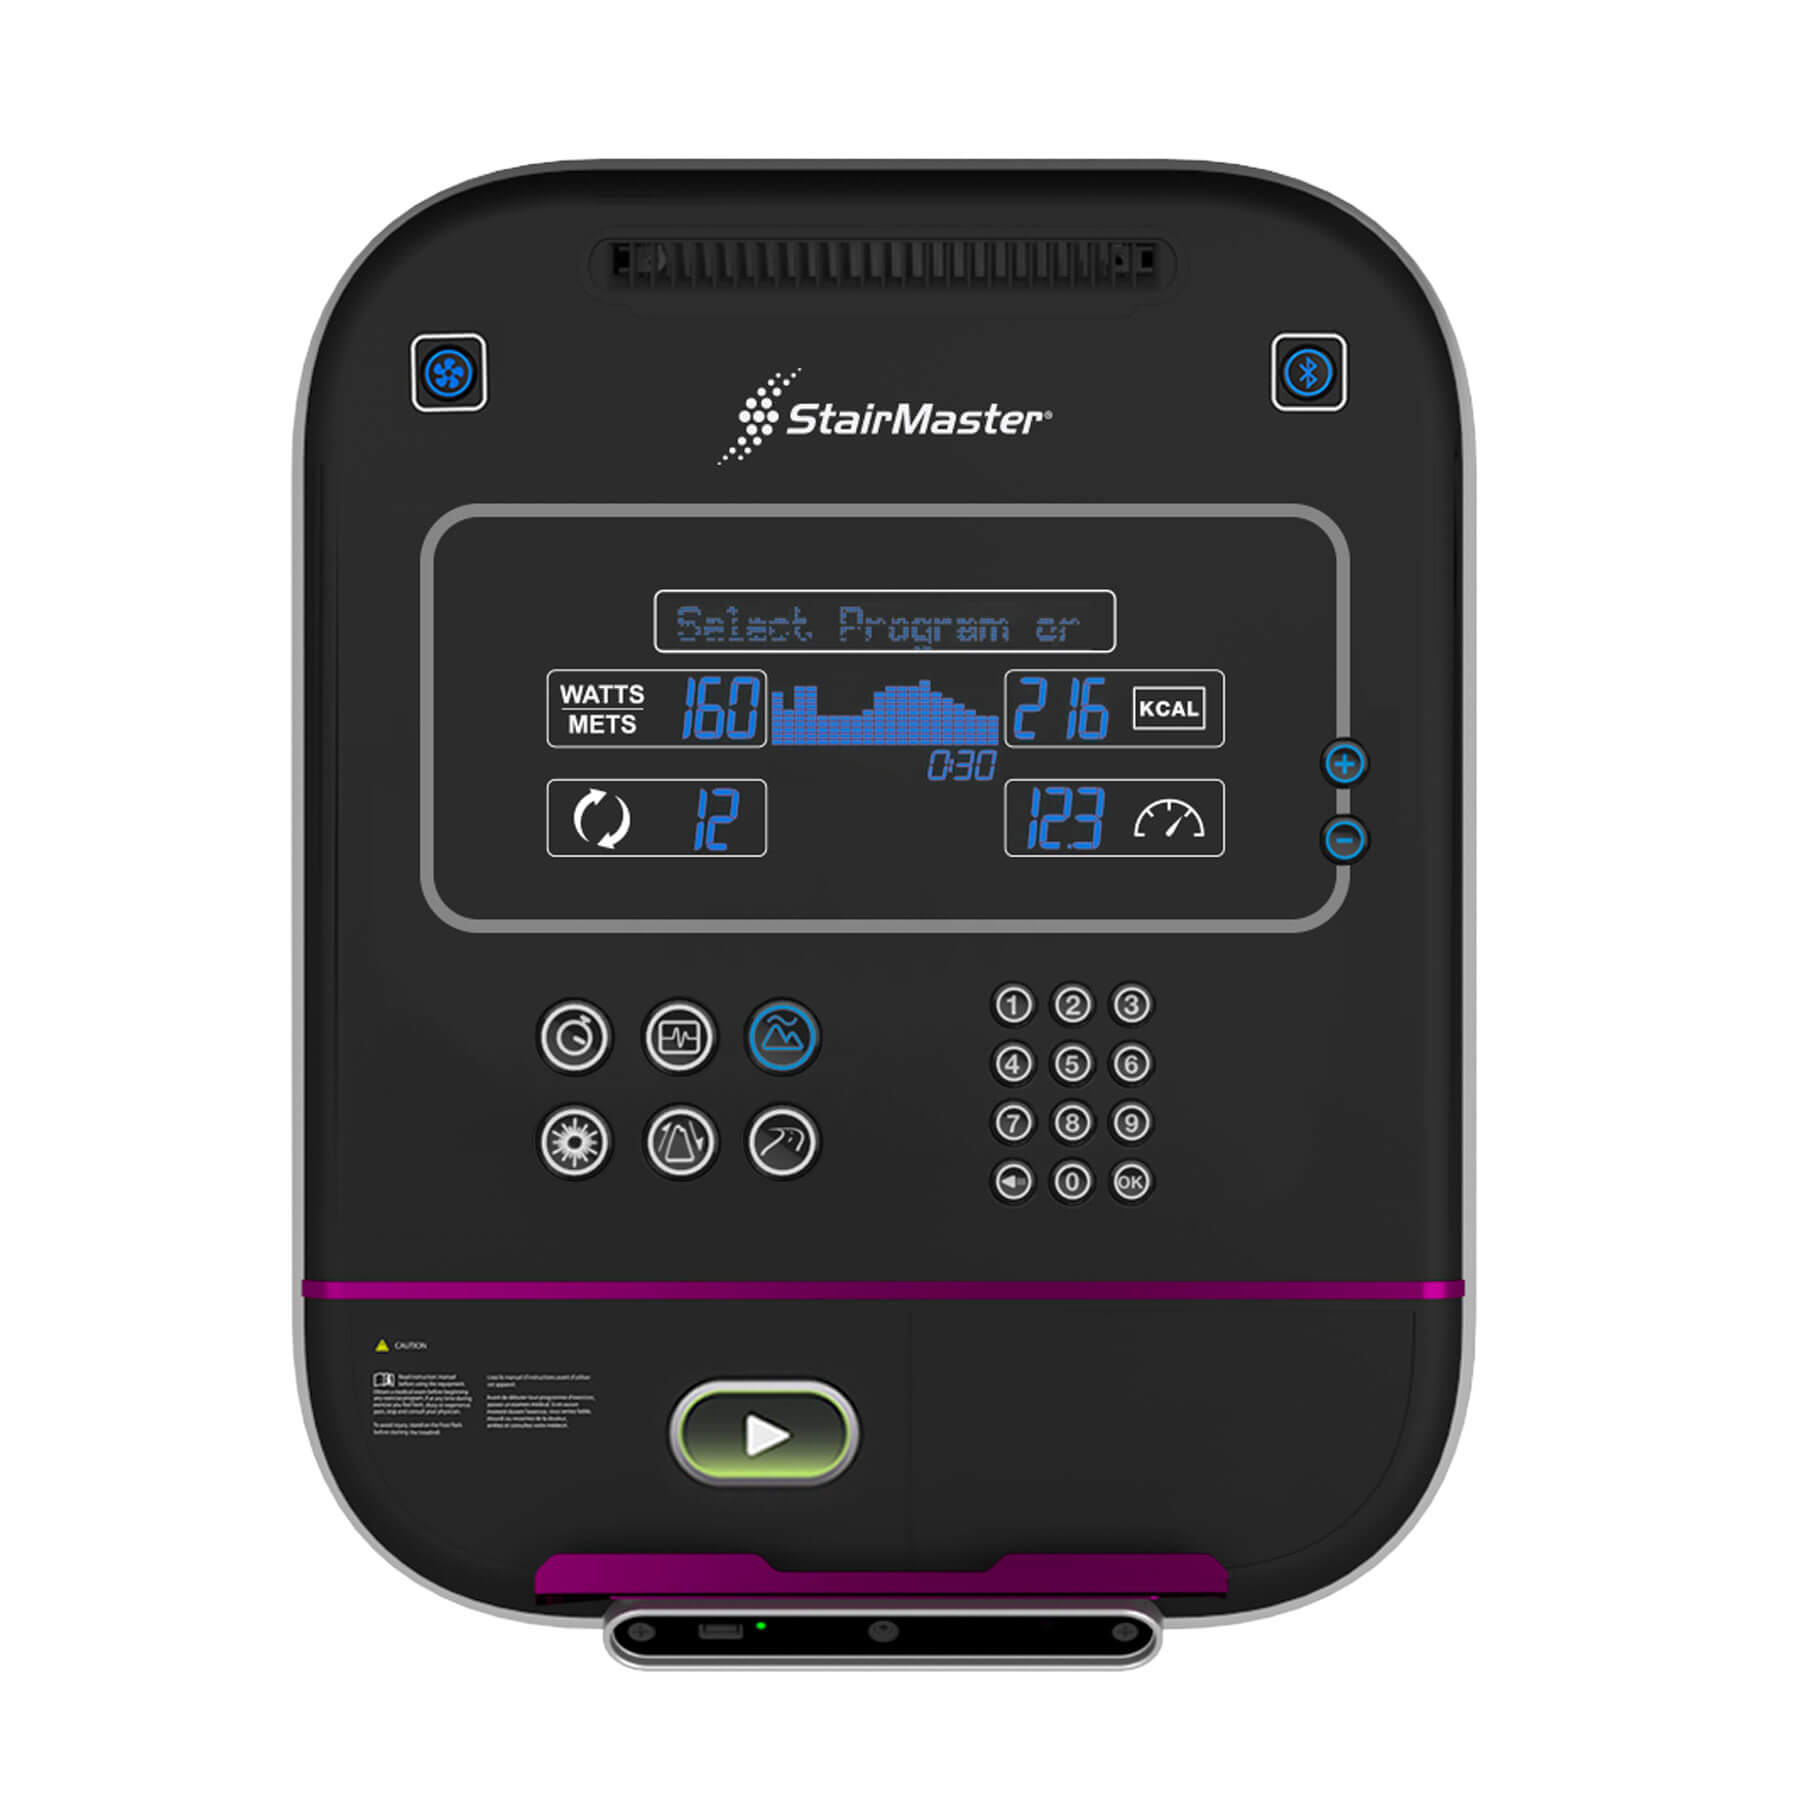 the lcd console of a stairmaster cardio machine with multiple workout features